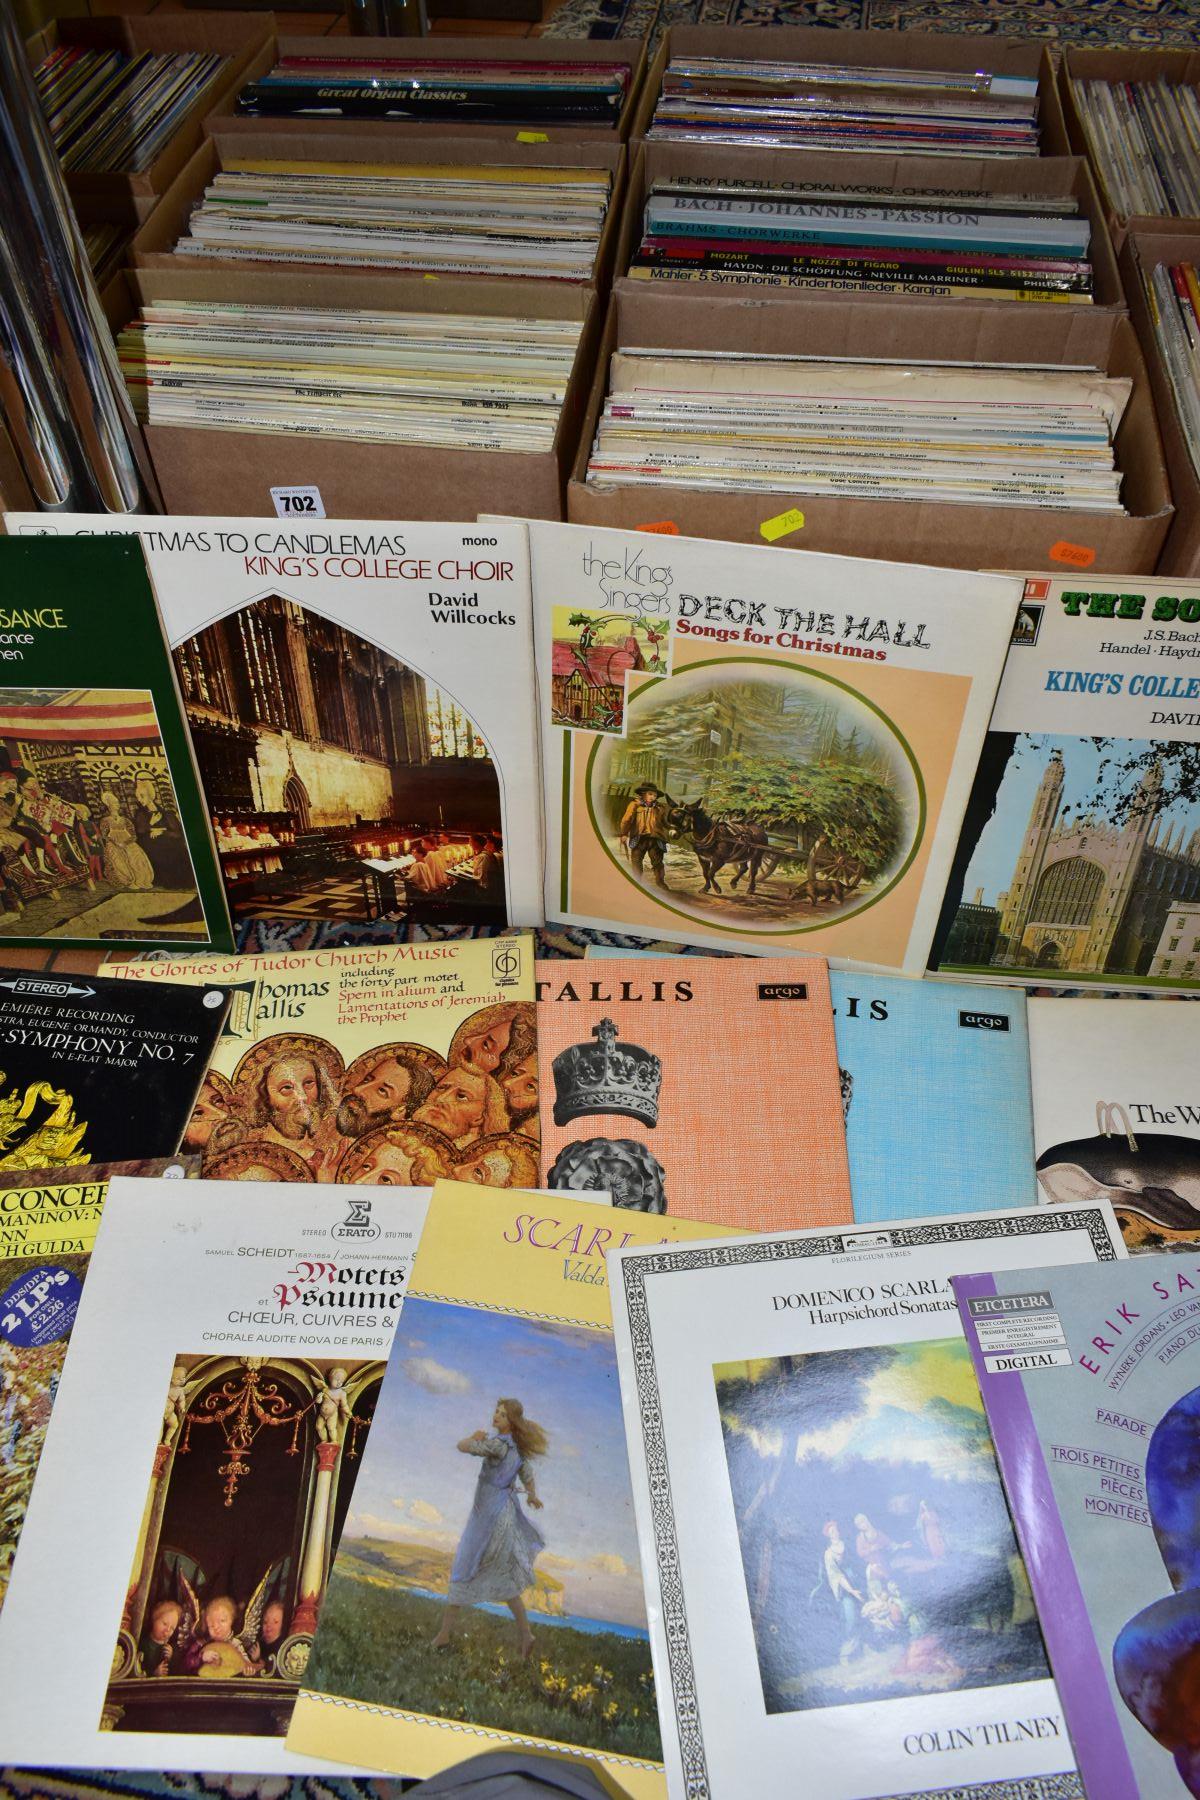 TEN BOXES OF LP RECORDS, to include 400+ LPs, mainly classical music, composers include Henry